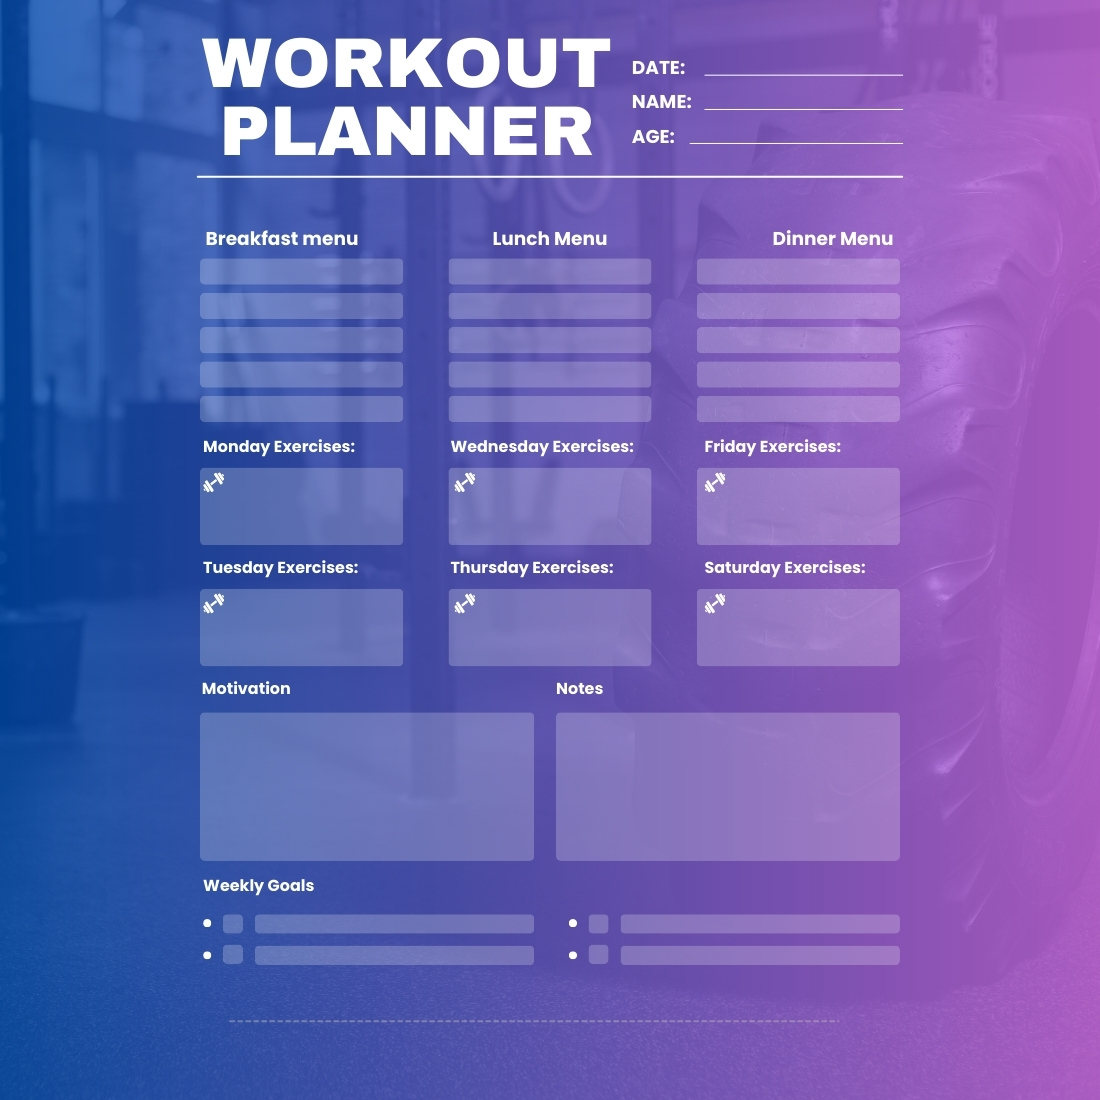 Workout Planner preview image.